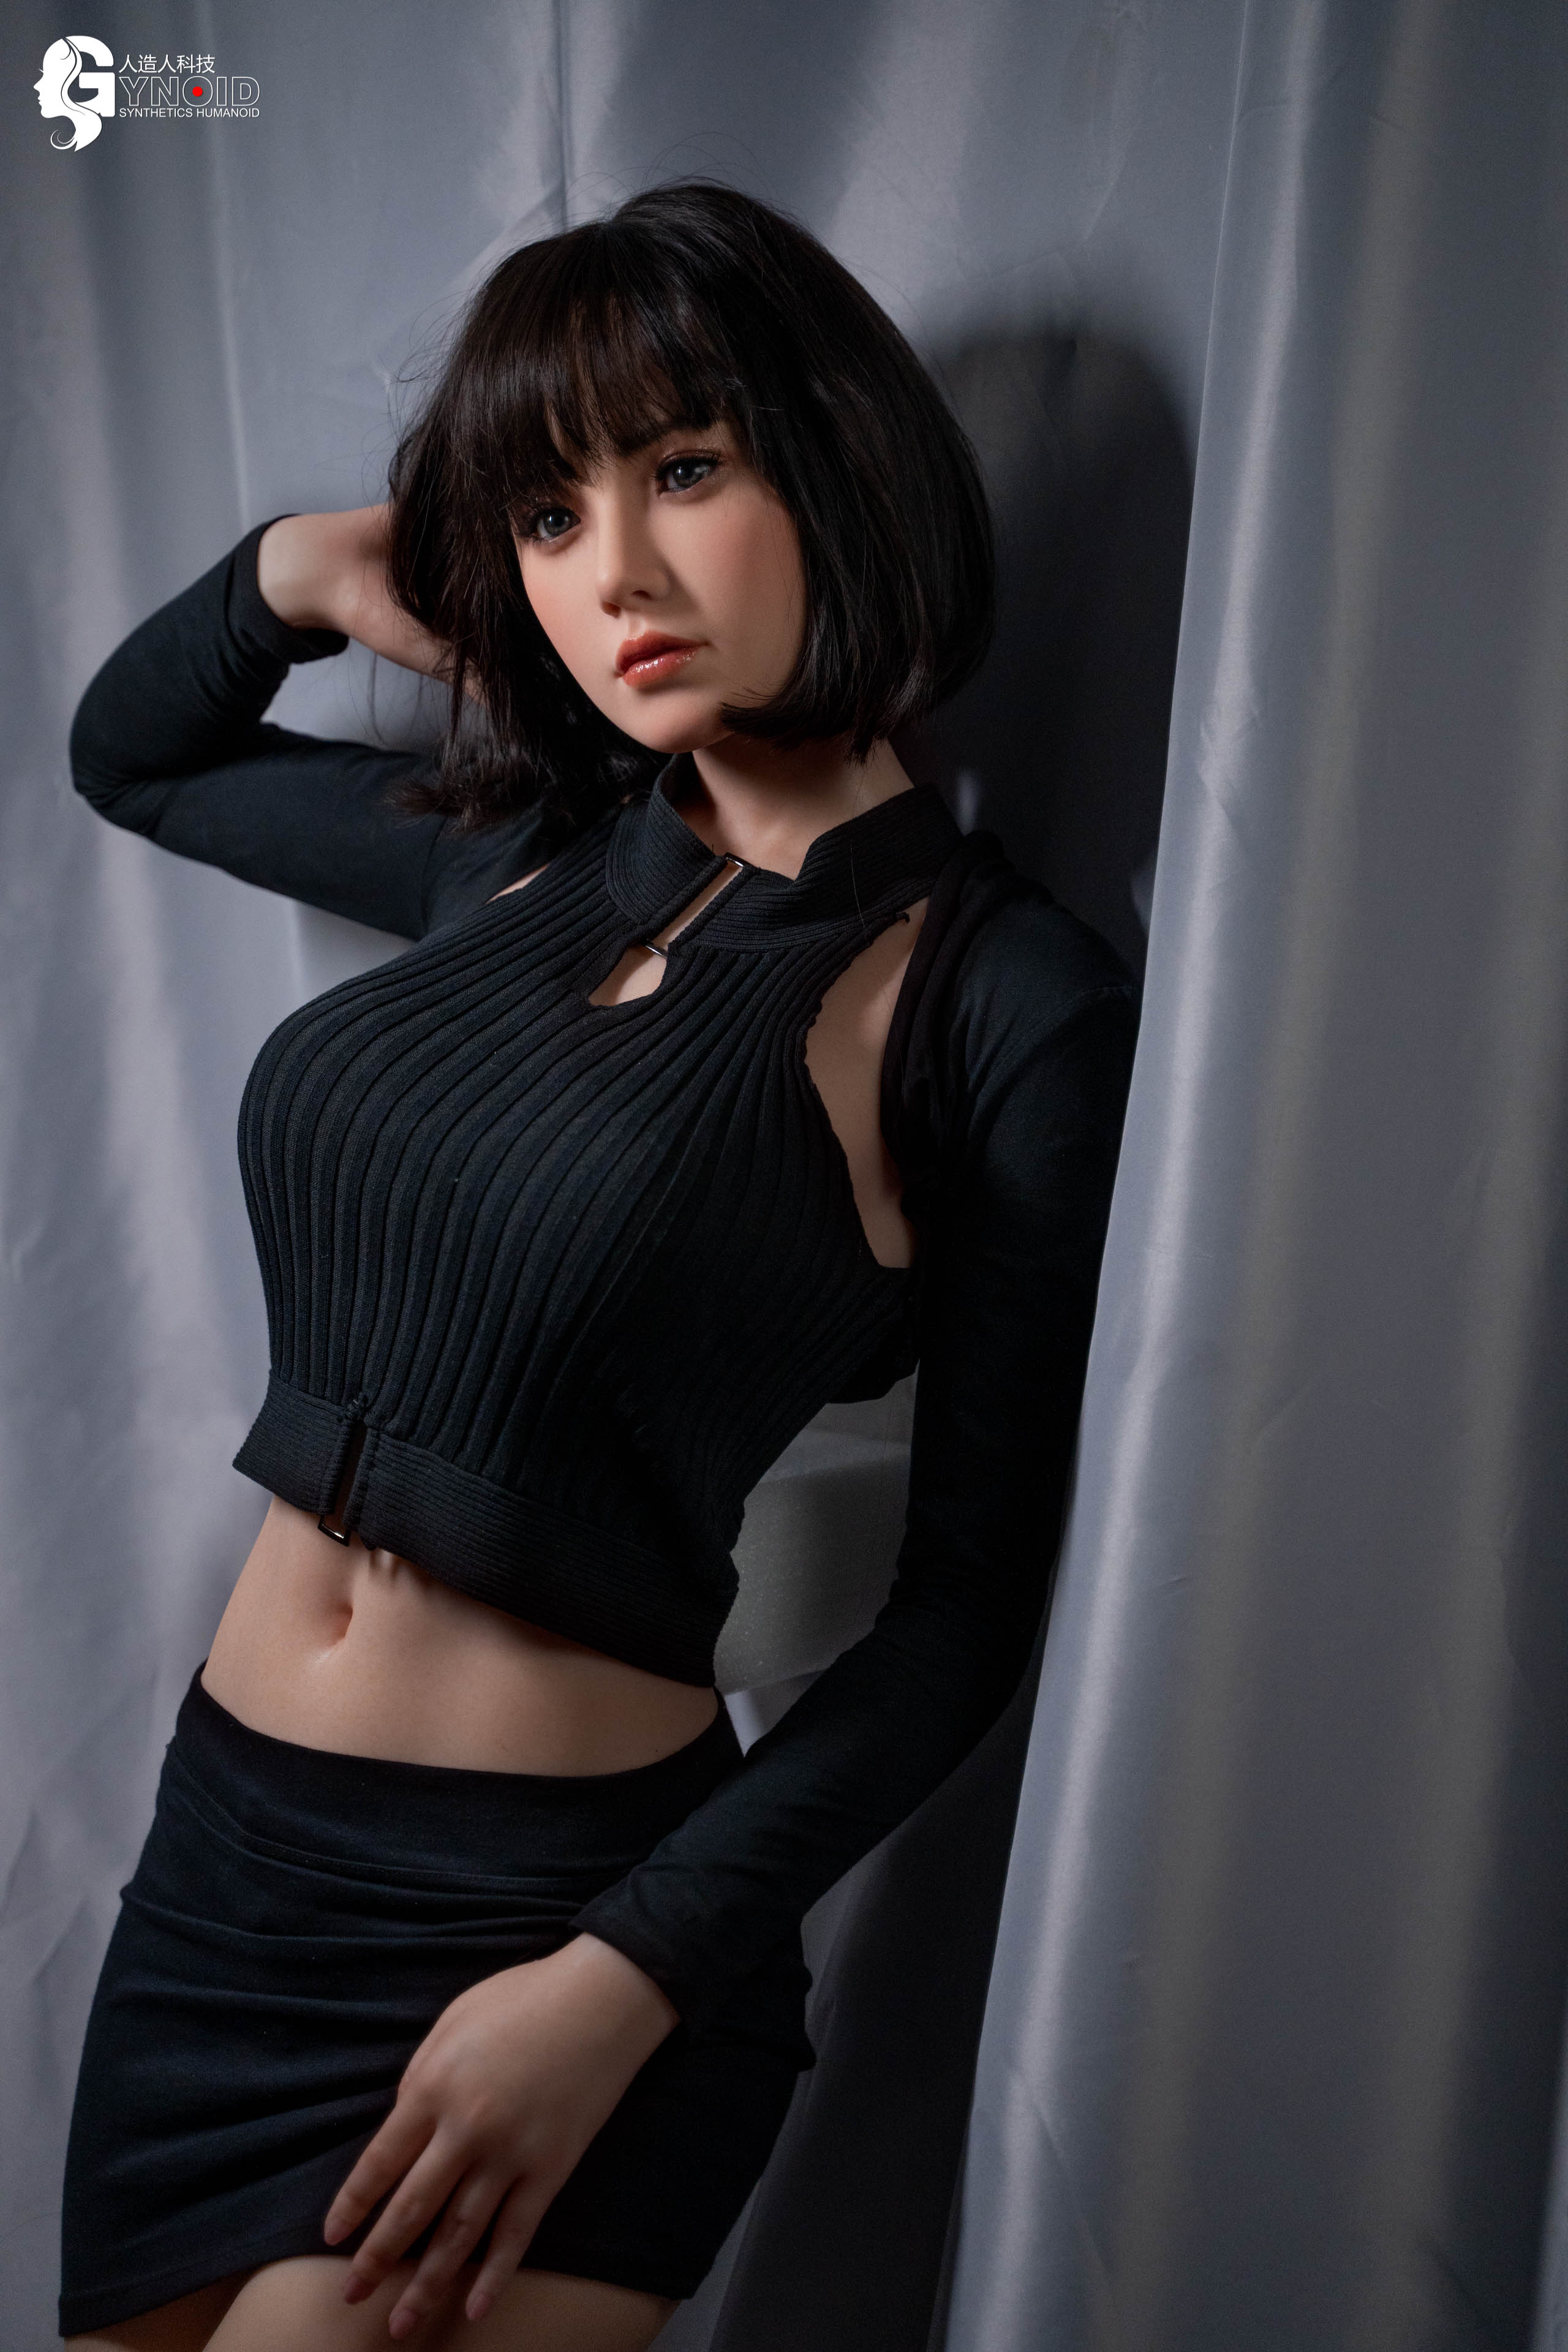 Gynoid Doll 170 cm Deluxe Silicone - Lori | Buy Sex Dolls at DOLLS ACTUALLY